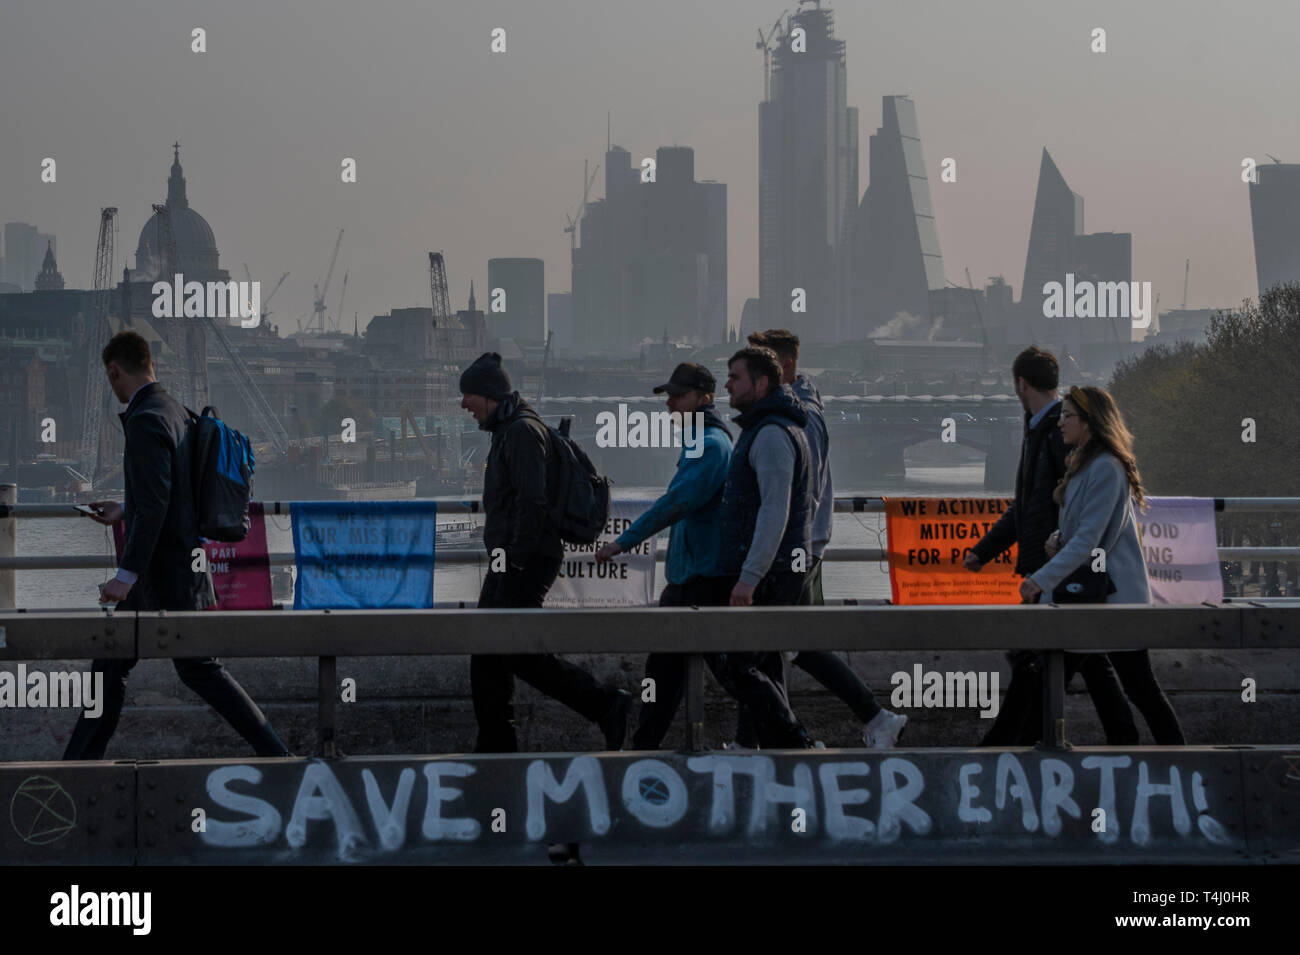 London, UK. 17th Apr 2019. Morning on Waterloo Bridge sees the camp awake and commuters make their progress on foot and bike across the river - Day 3 - Protestors from Extinction Rebellion block several junctions in London as part of their ongoing protest to demand action by the UK Government on the 'climate chrisis'. The action is part of an international co-ordinated protest. Credit: Guy Bell/Alamy Live News Stock Photo